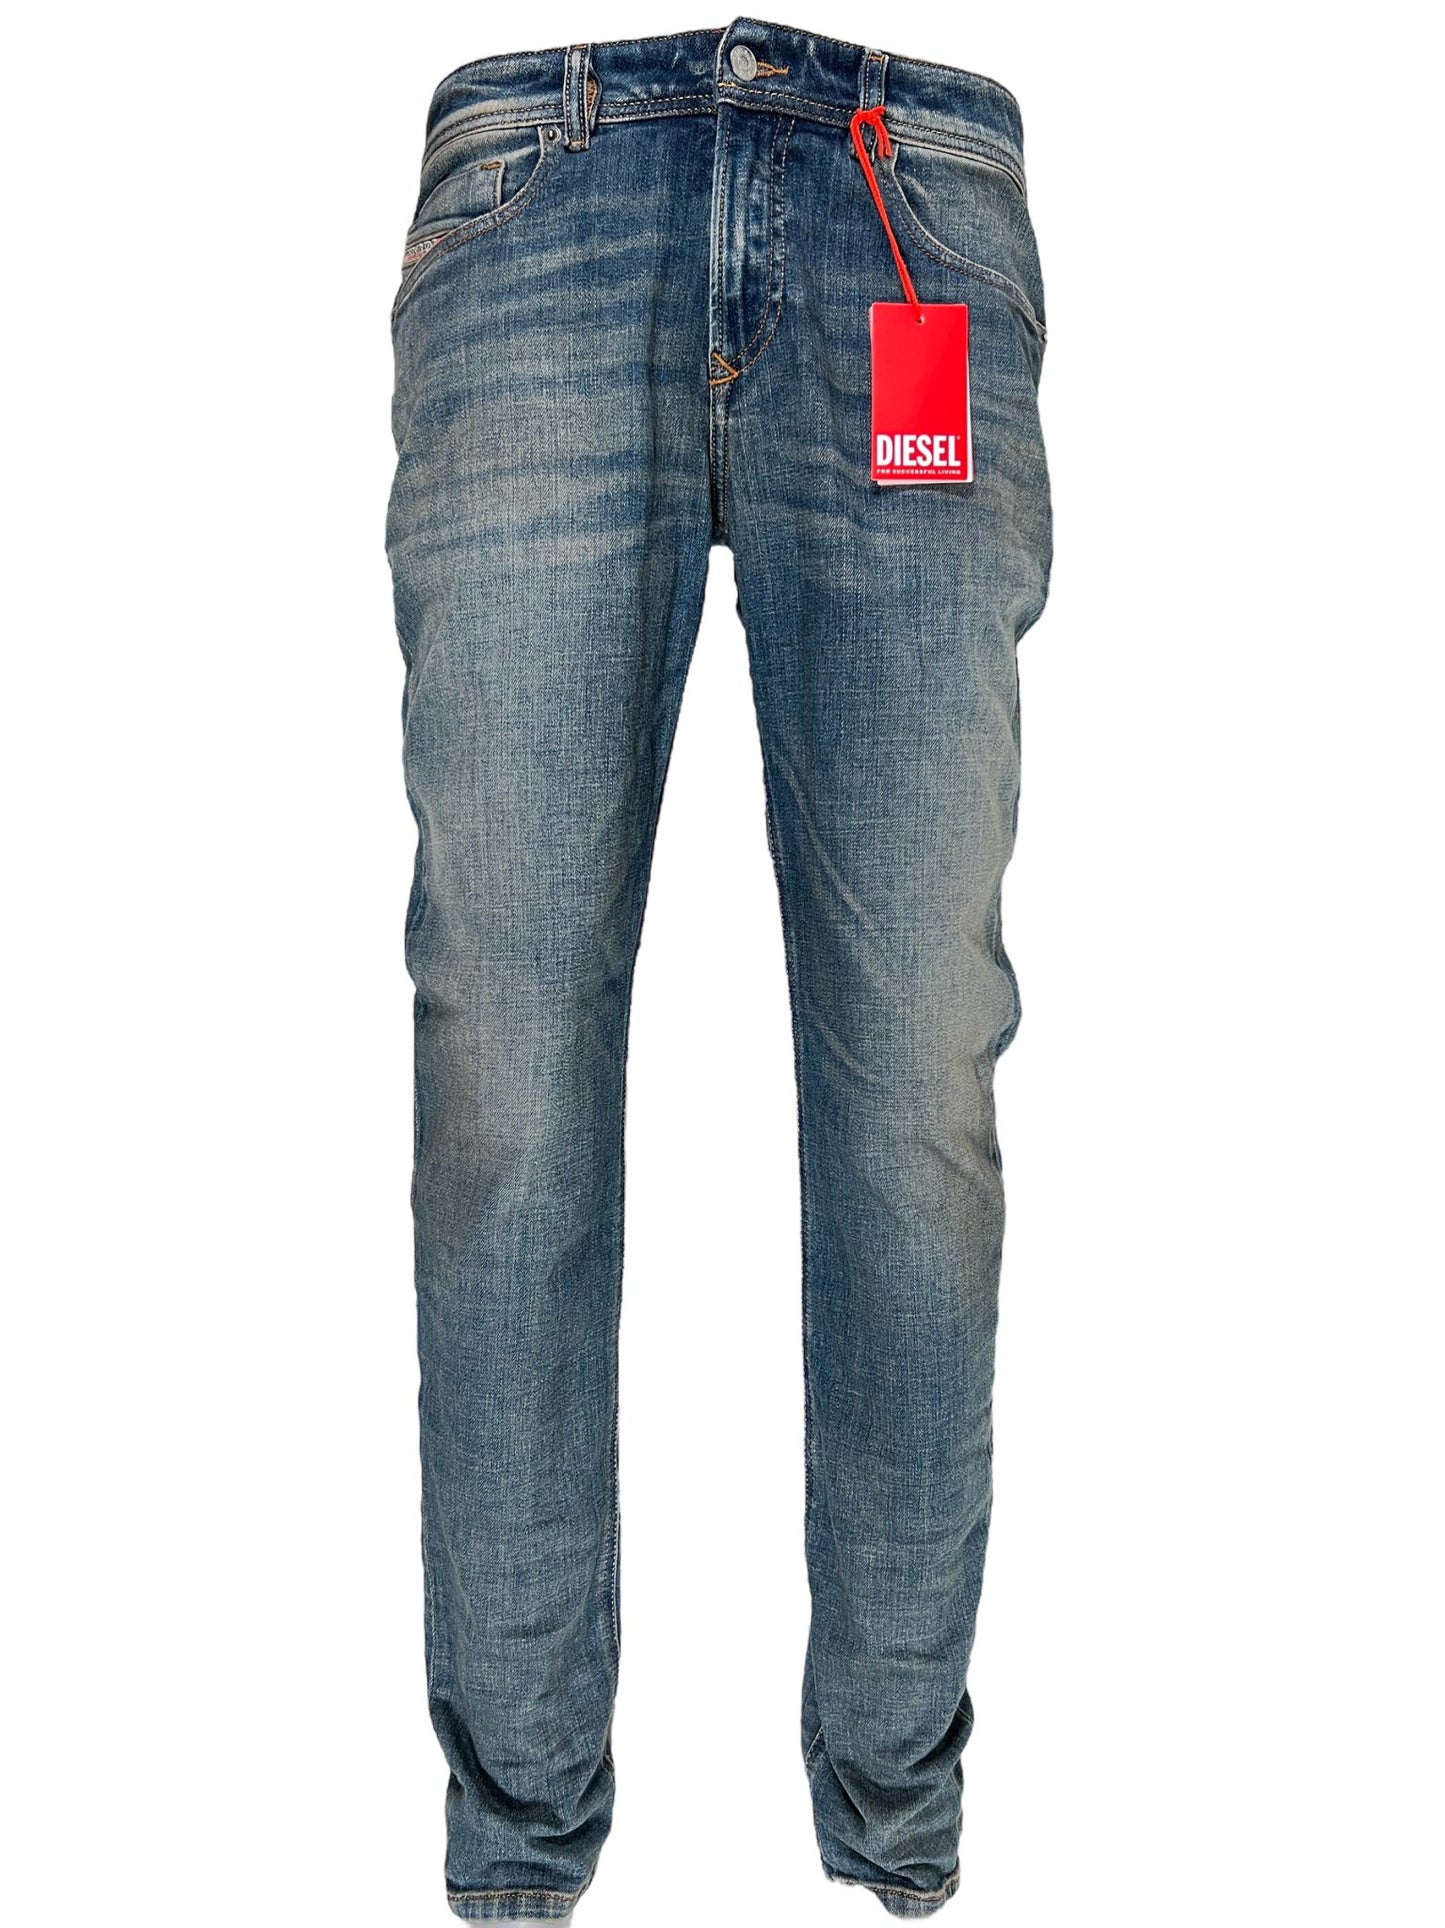 A pair of DIESEL 2019 D-STRUKT 9H49 DENIM slim fit jeans with a red tag on them.